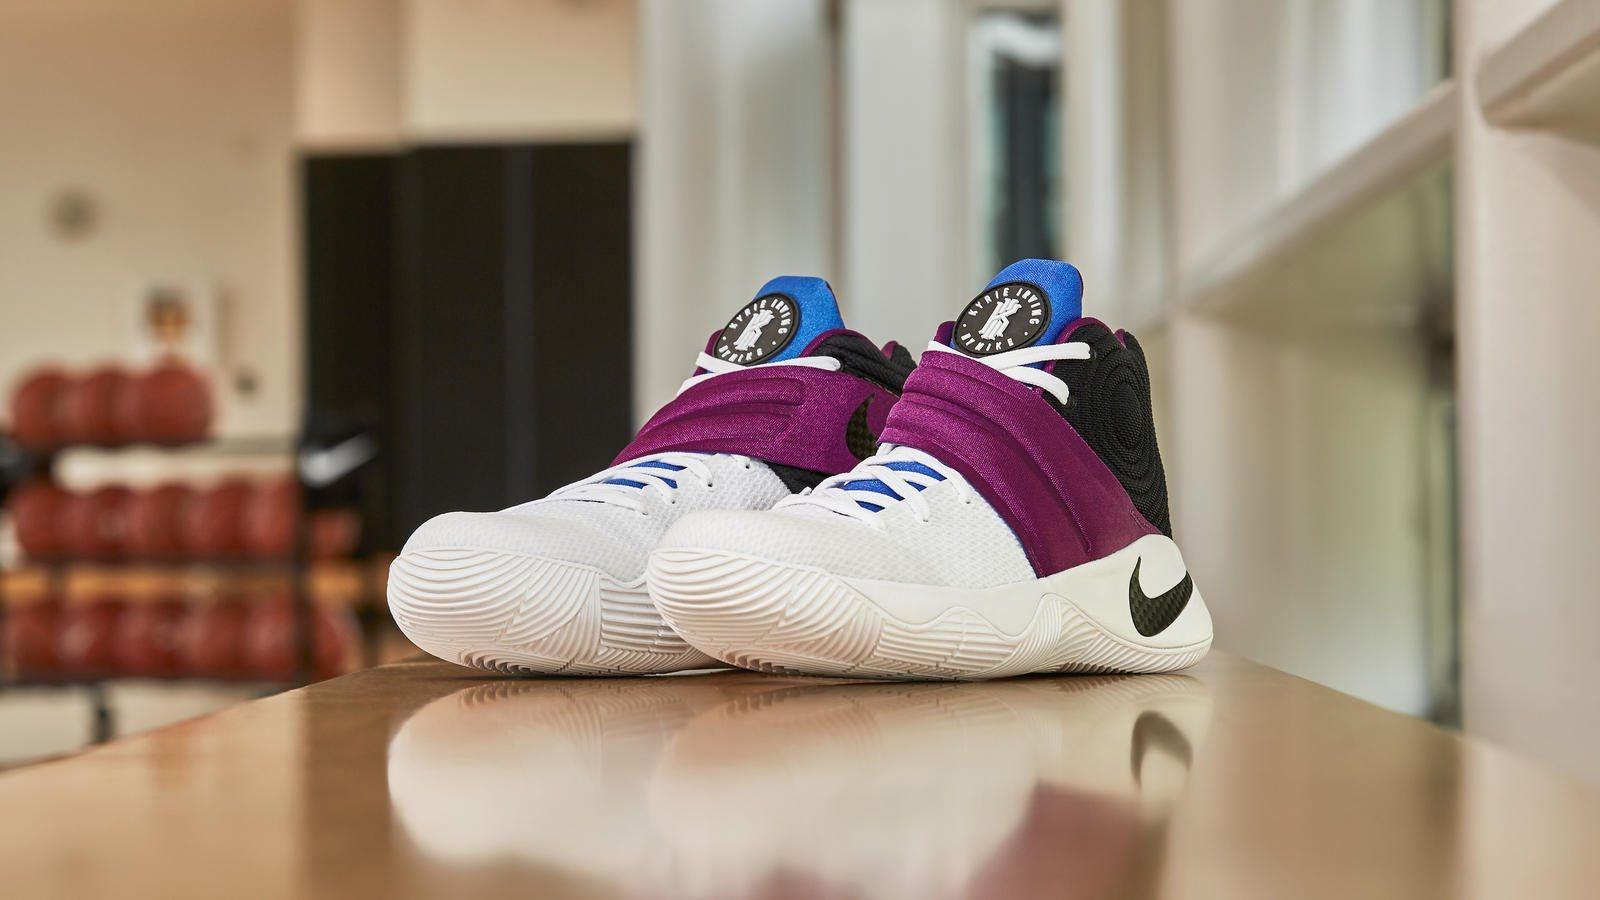 The Nike Kyrie 2 Kyrache Is A Tribute To An Iconic Nike Sneaker